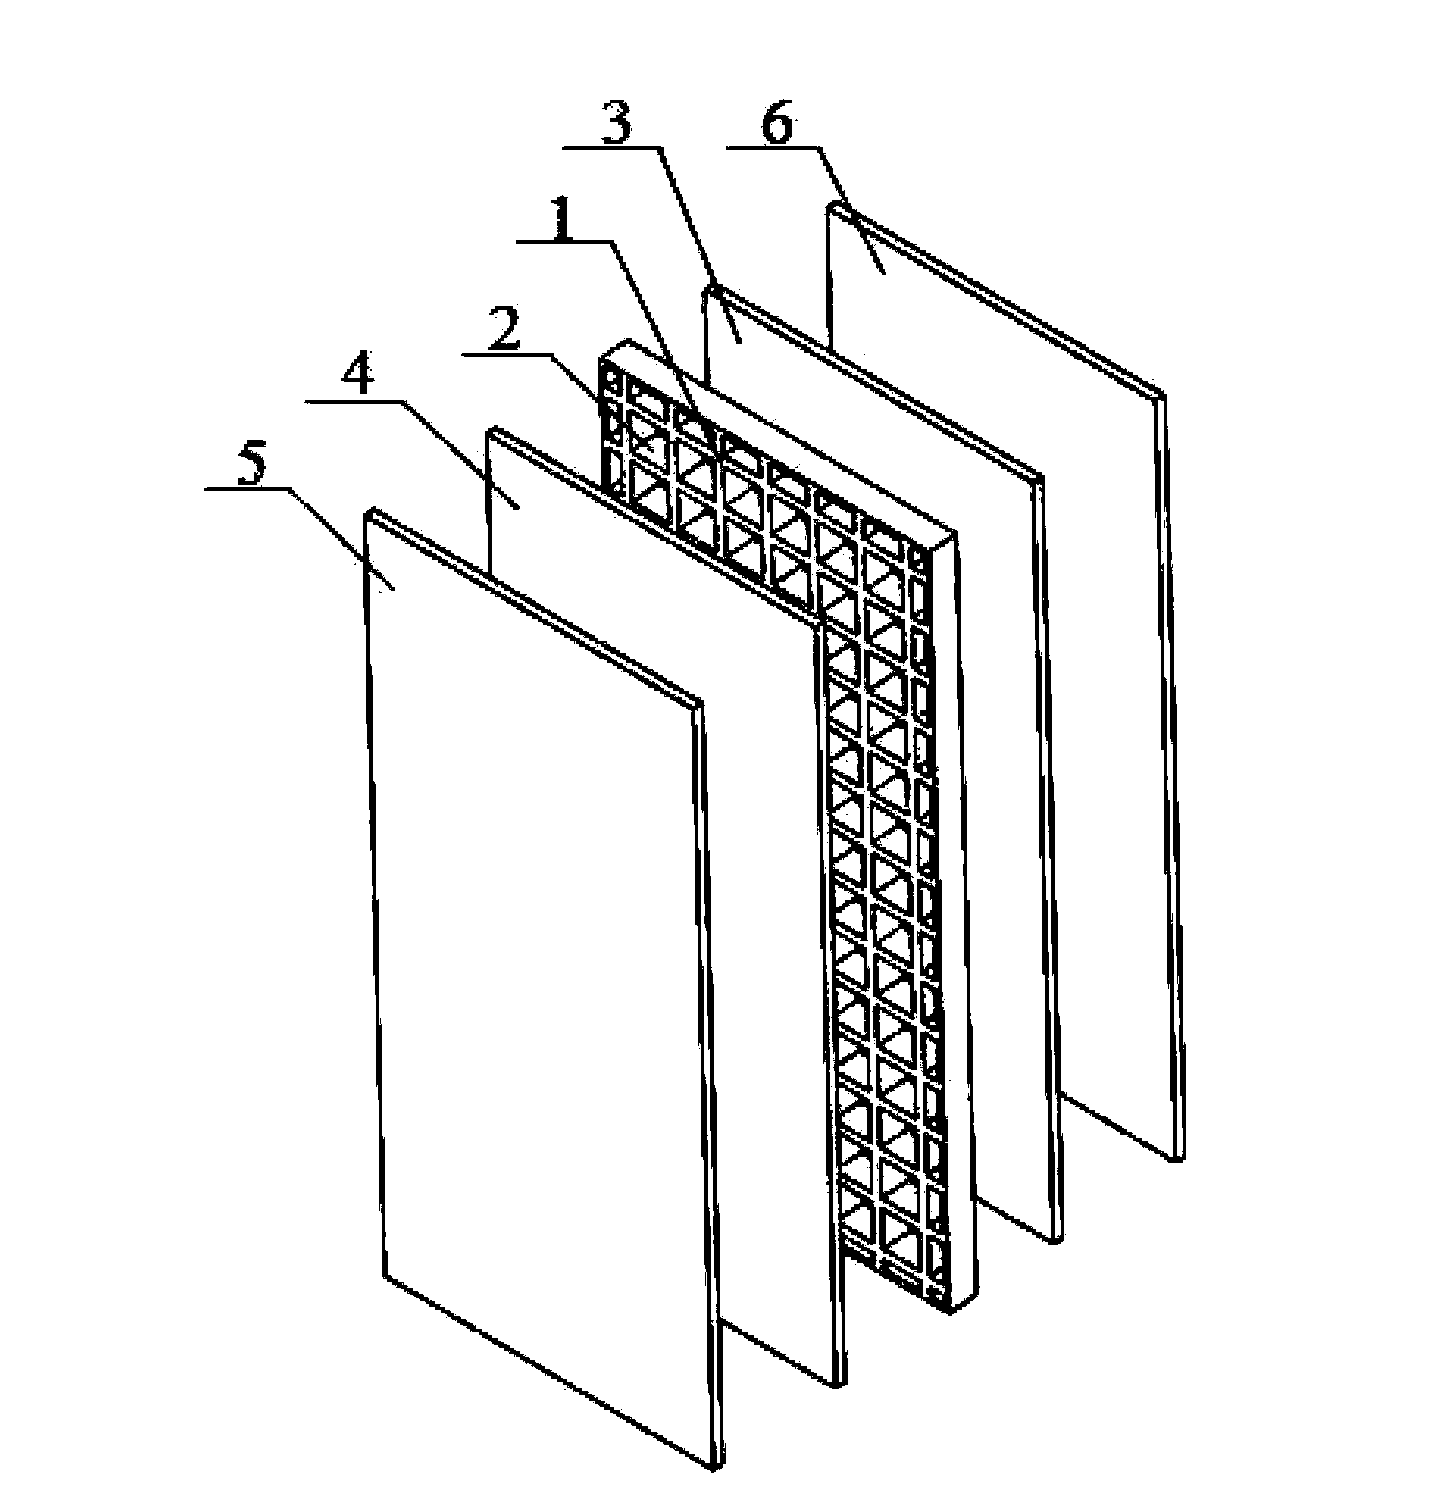 Noise-reducing insulation fireproof wall